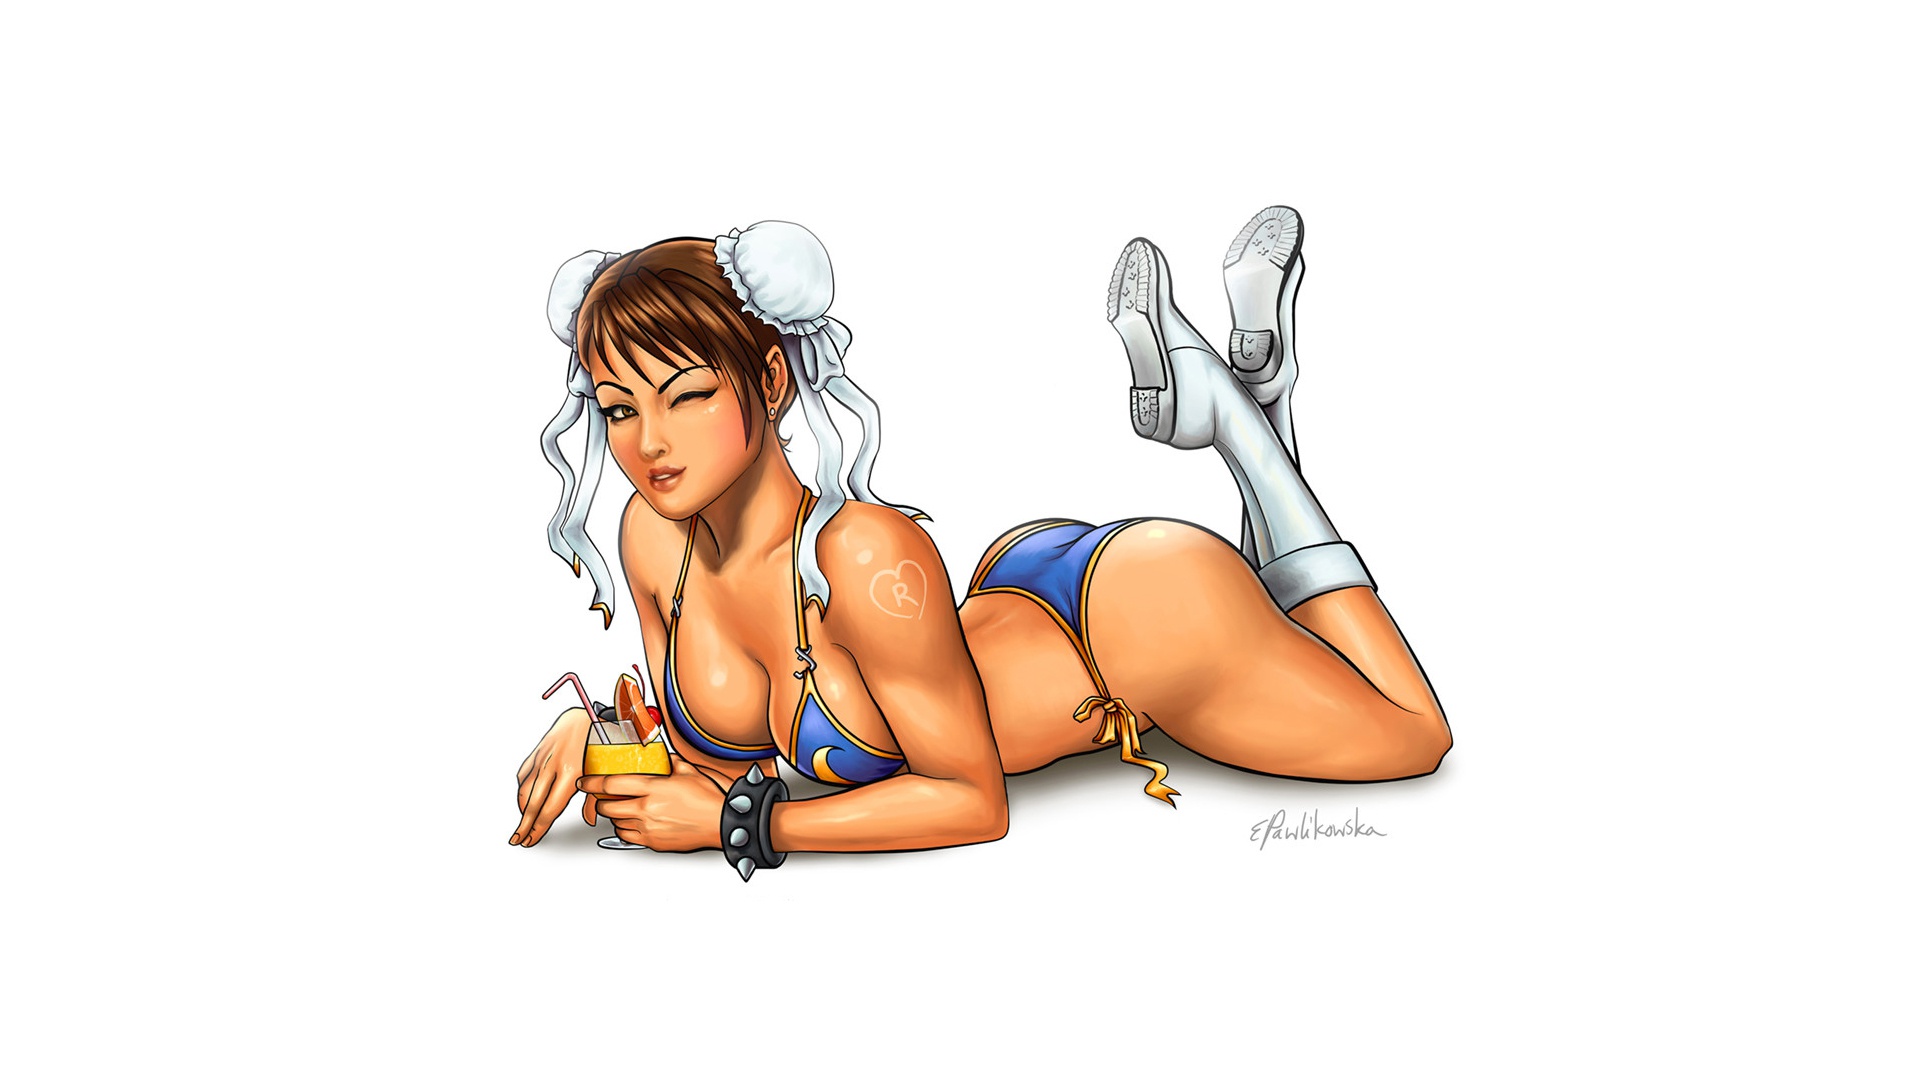 General 1920x1080 video games video game art Street Fighter Chun-Li boobs legs up simple background white background one eye closed cocktails video game warriors ass